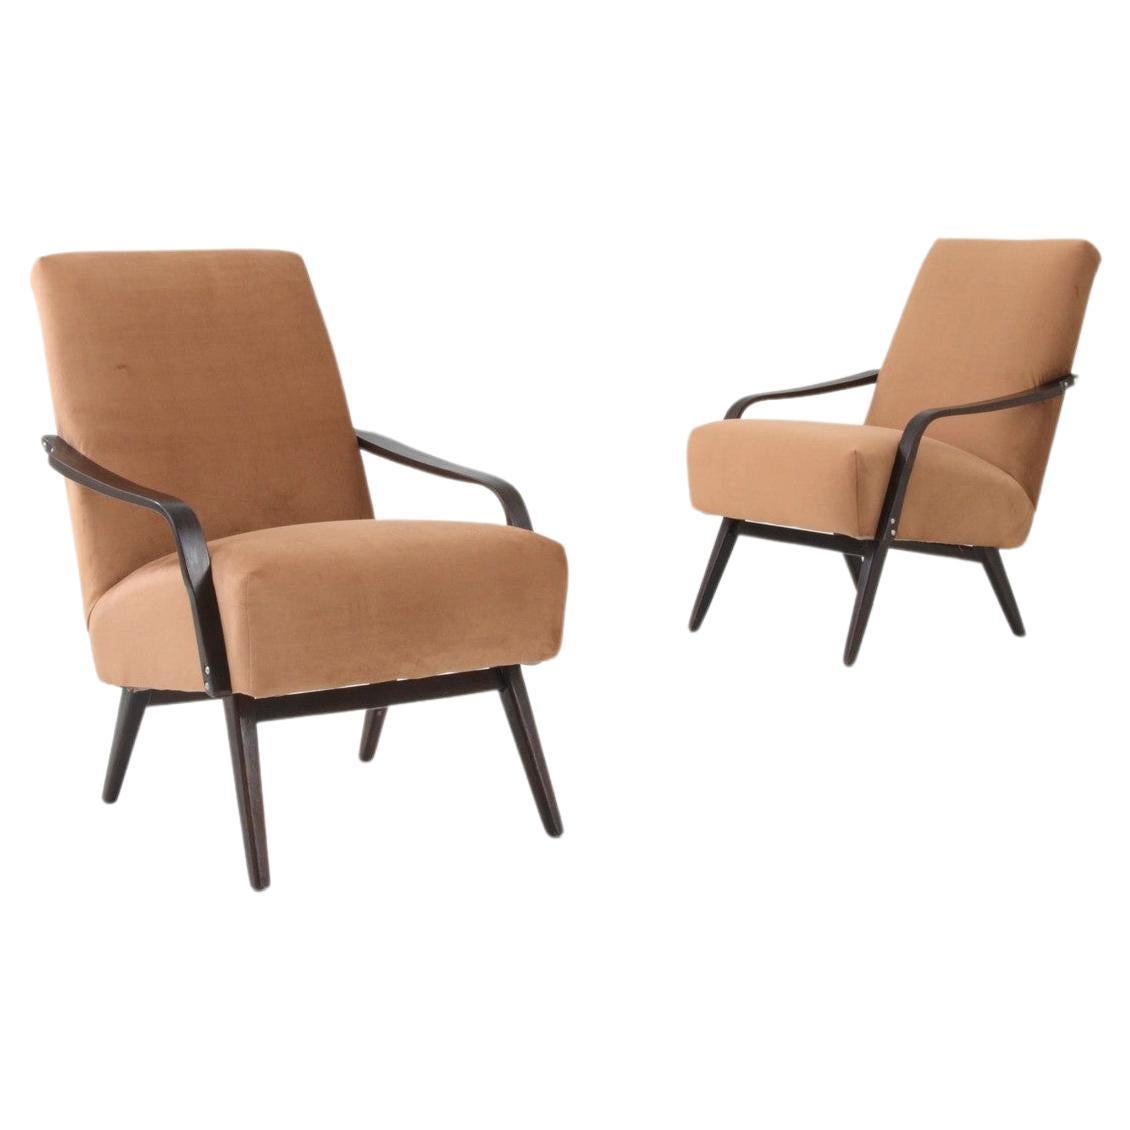 20th Century Armchairs by TON, a Pair For Sale